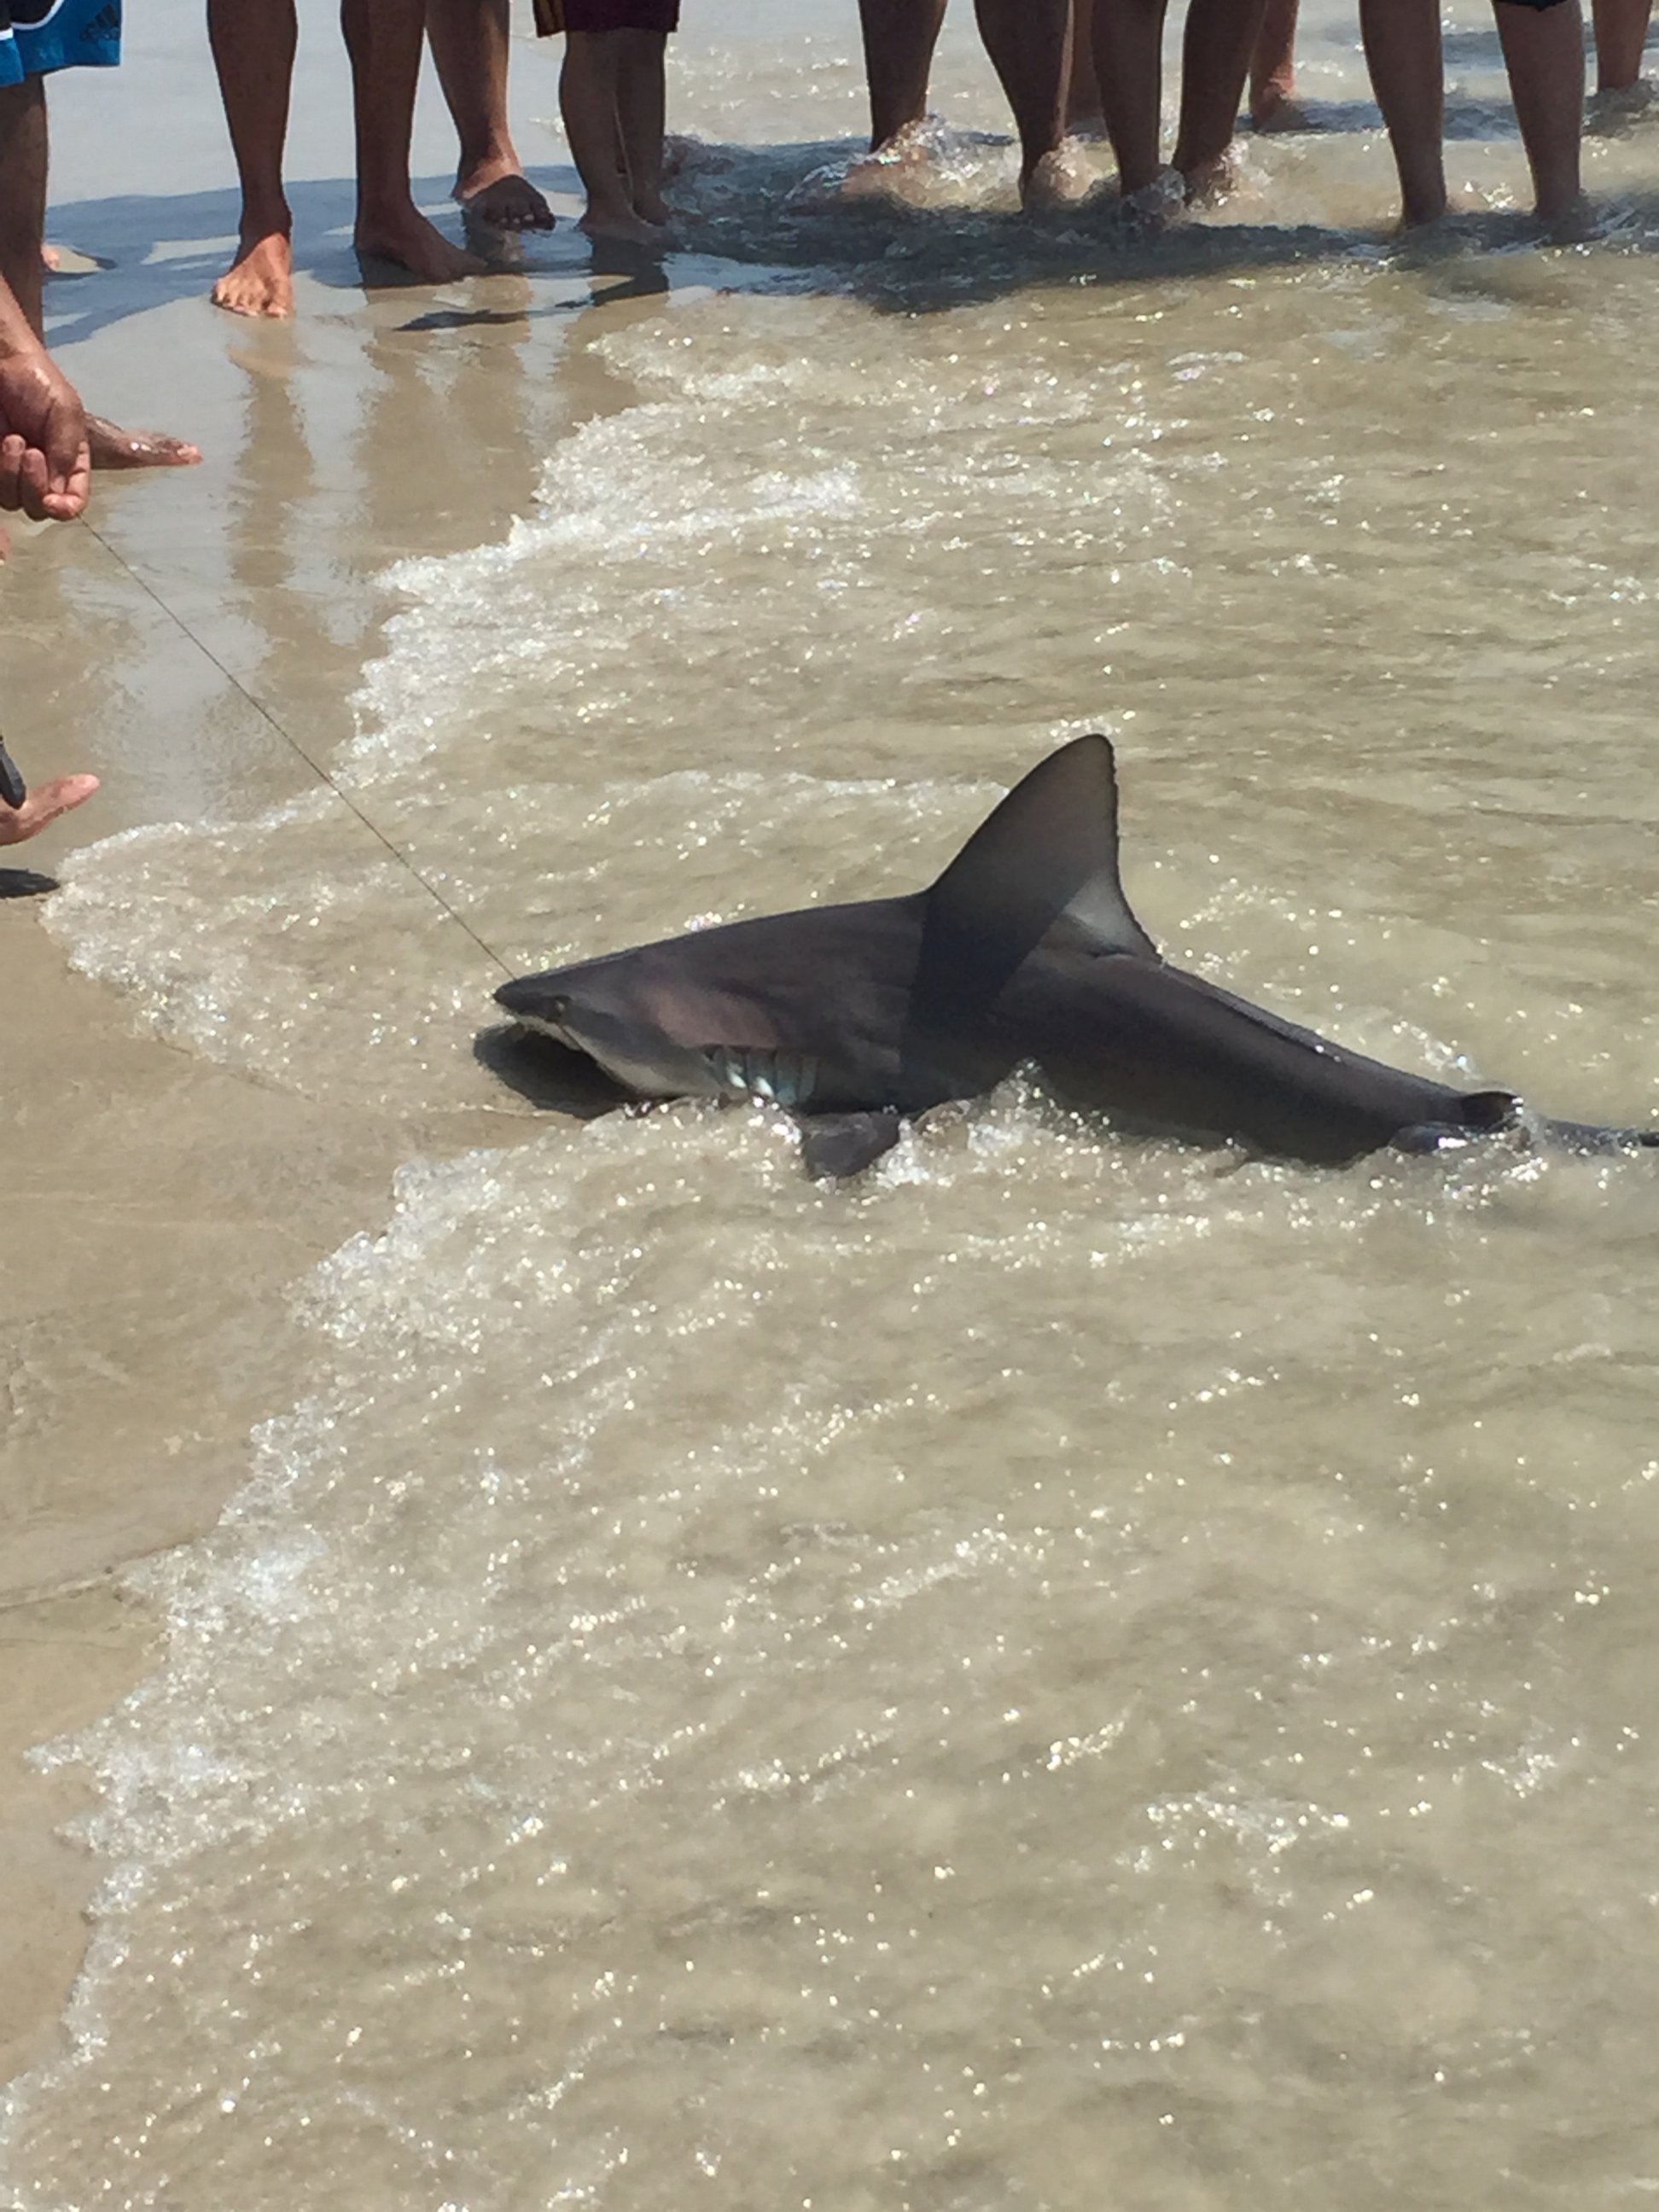 PHOTO: A woman was at Long Beach in New York when she saw a man hook several sharks on Aug. 16, 2015.